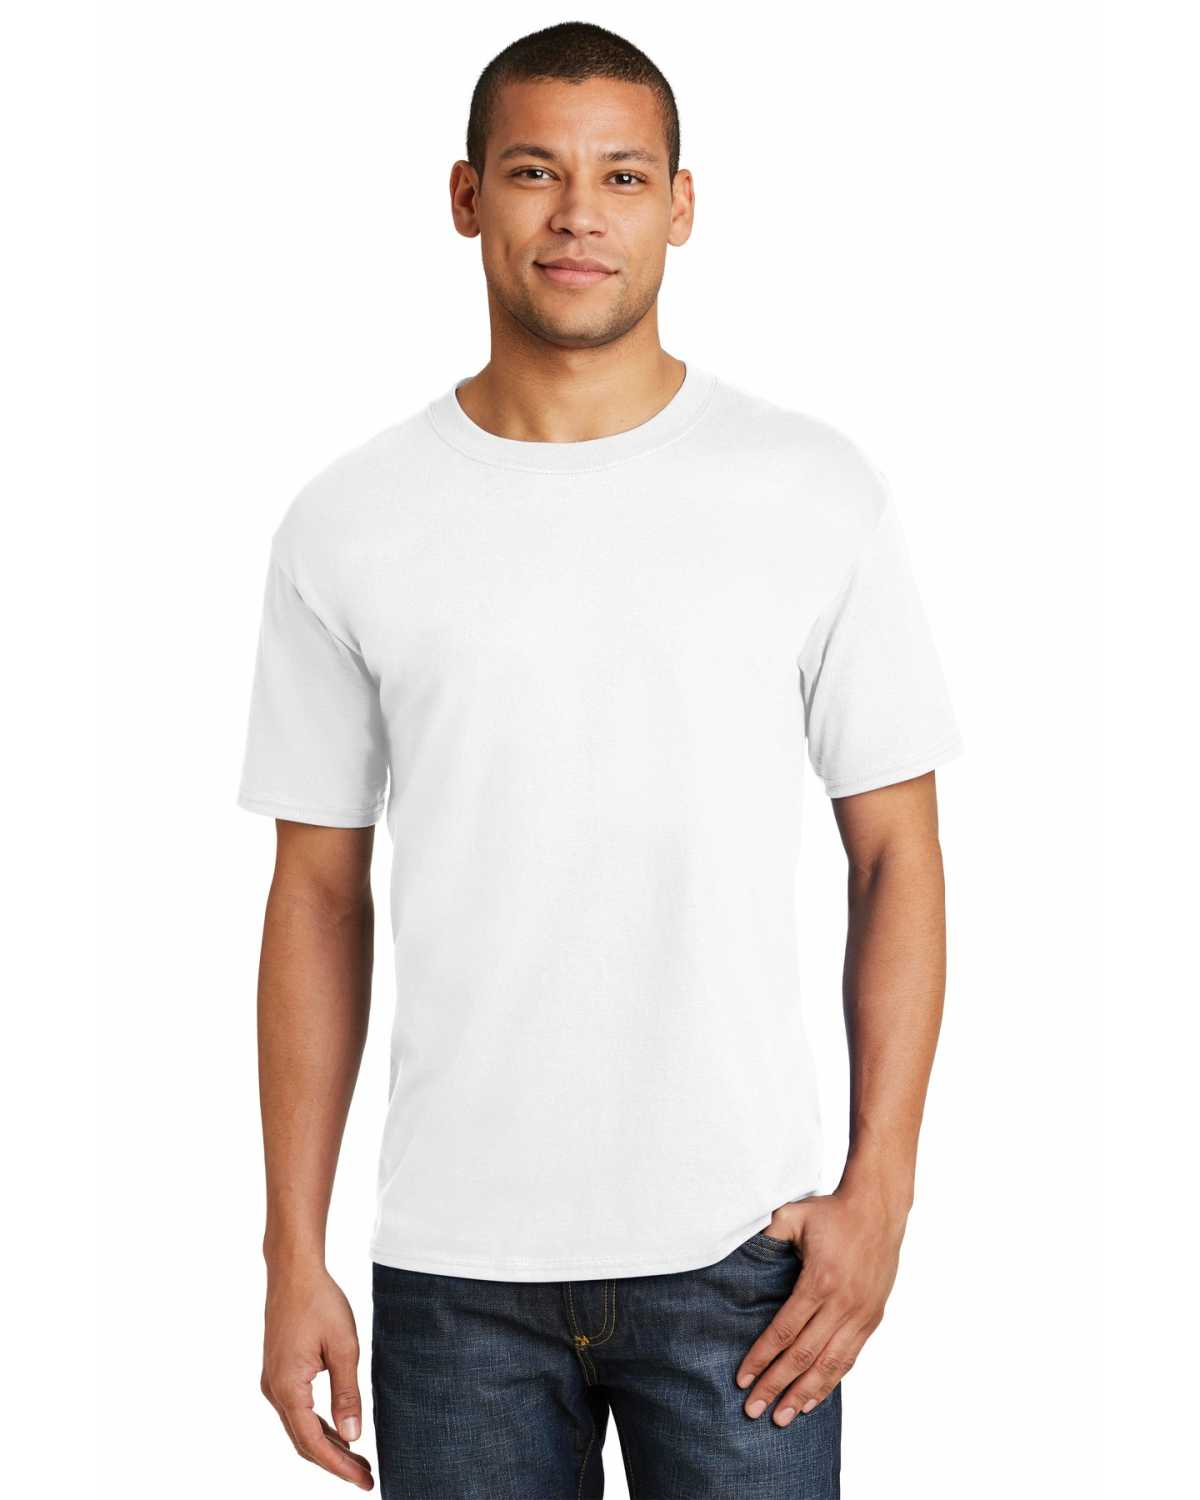 Hanes 5180 Beefy-T 100% Cotton T-Shirt on discount | ApparelChoice.com